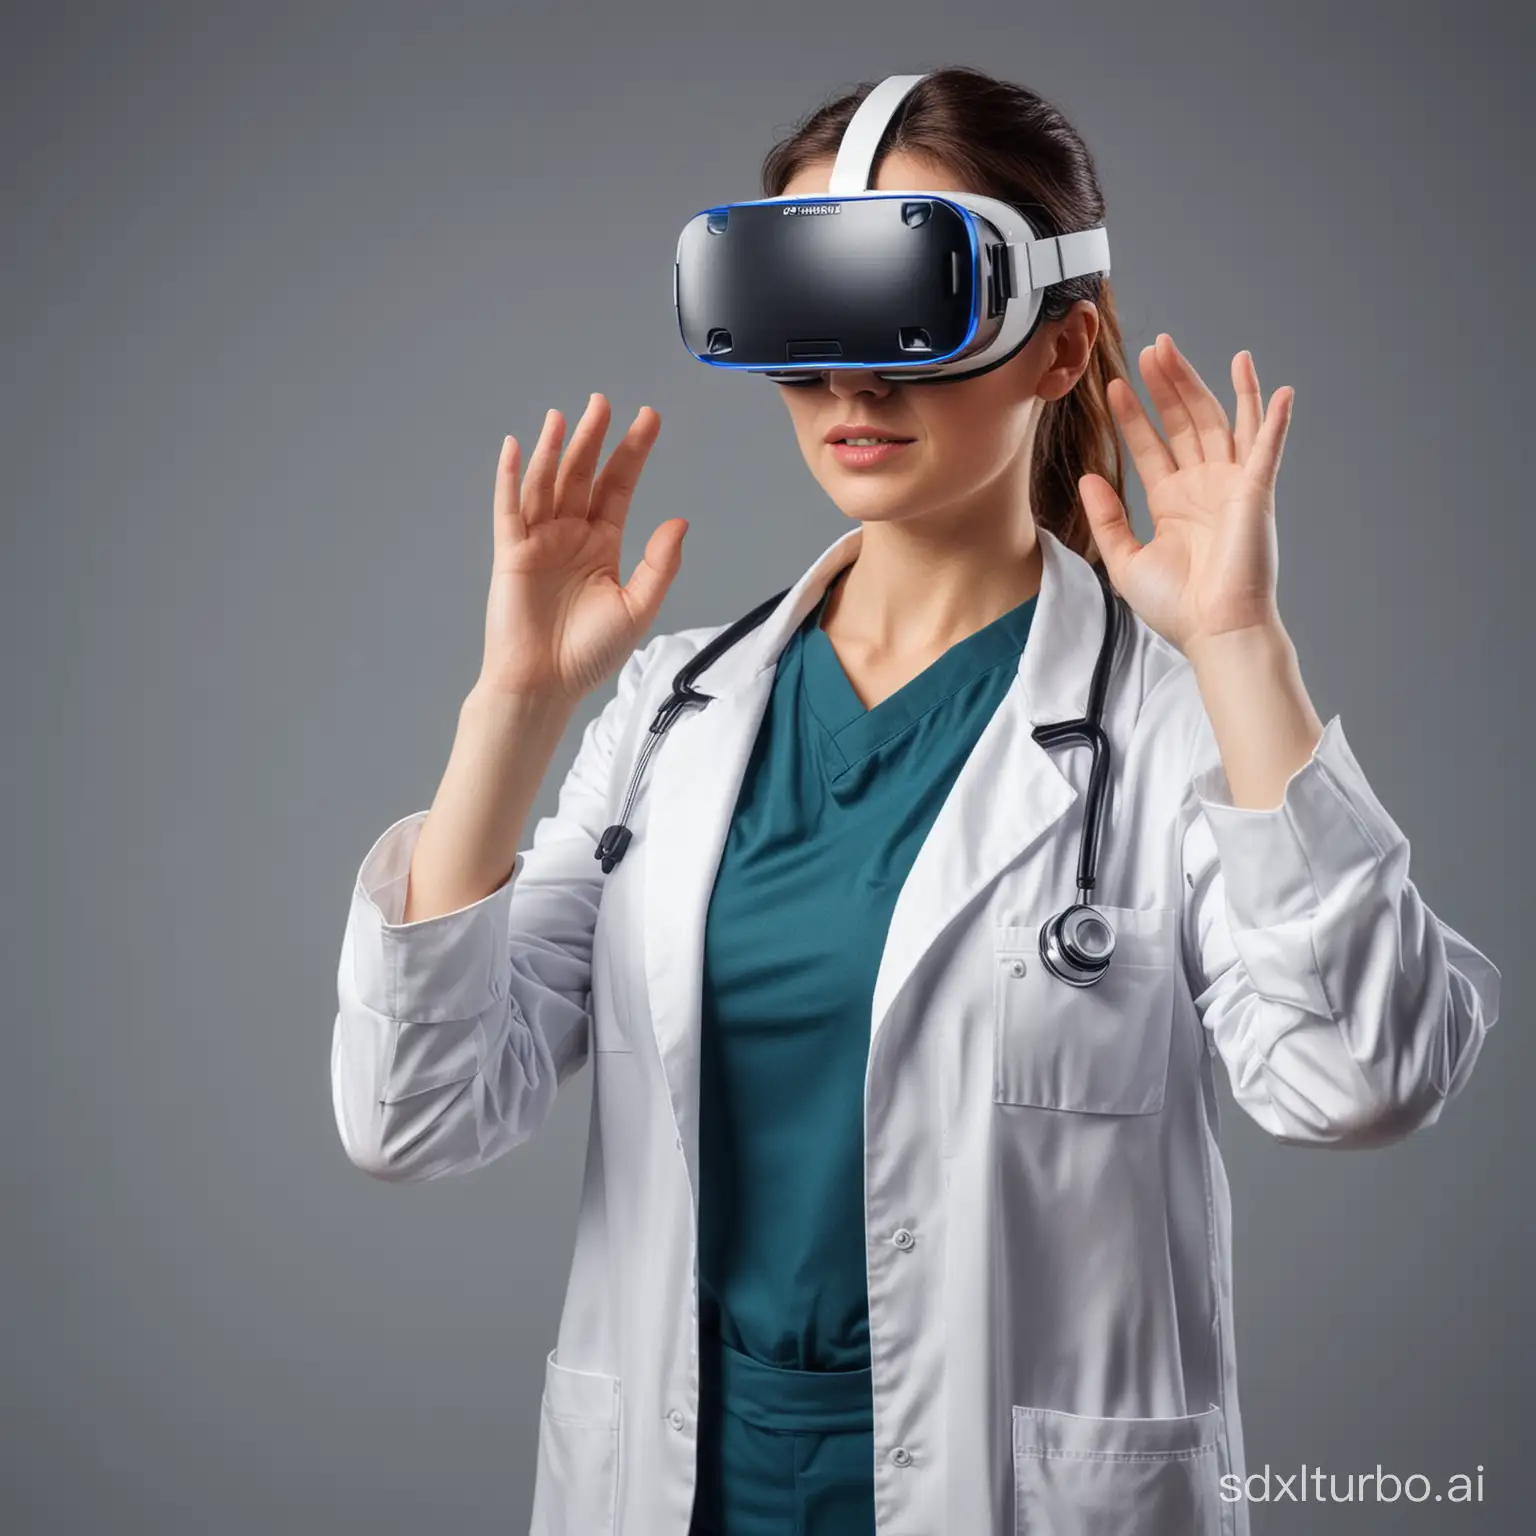 The female doctor with VR glasses